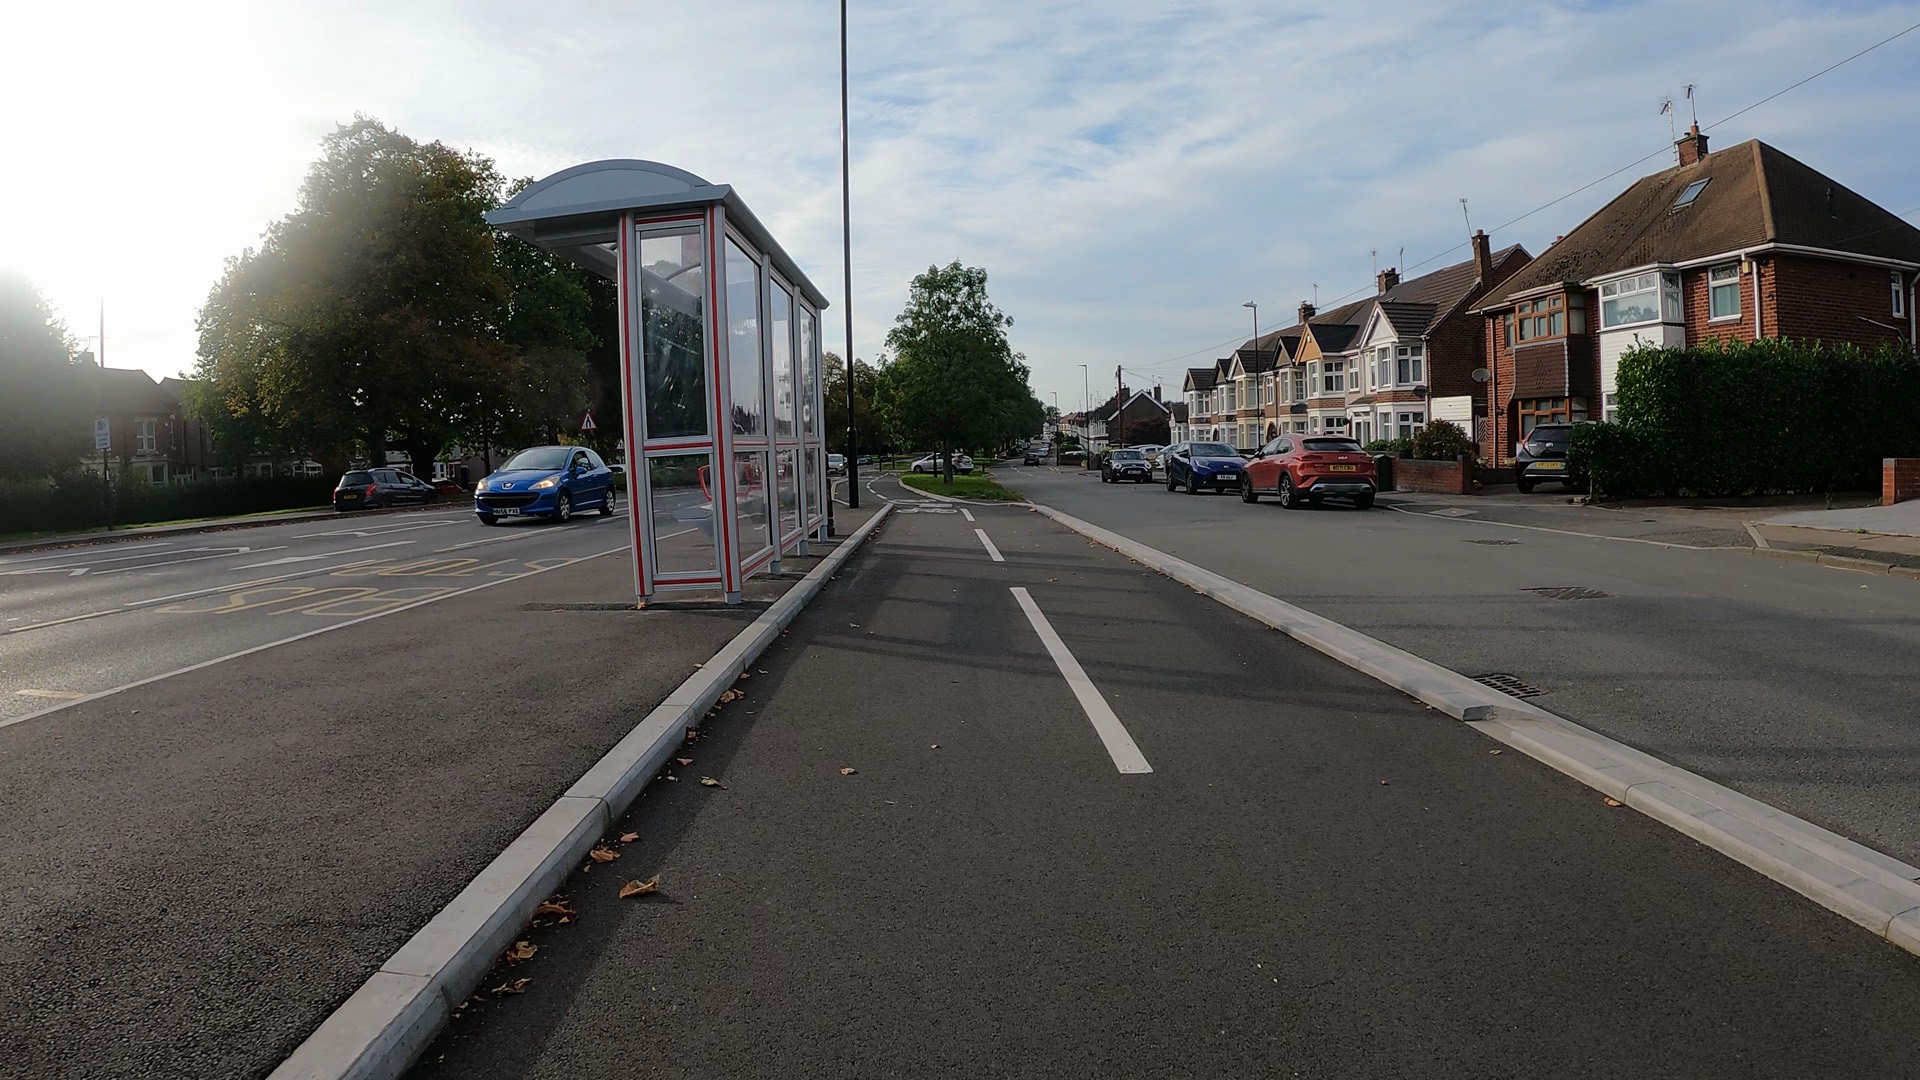 Separated bidirectional cycleway in Coventry. A floating bus-stop is on the left of the image.